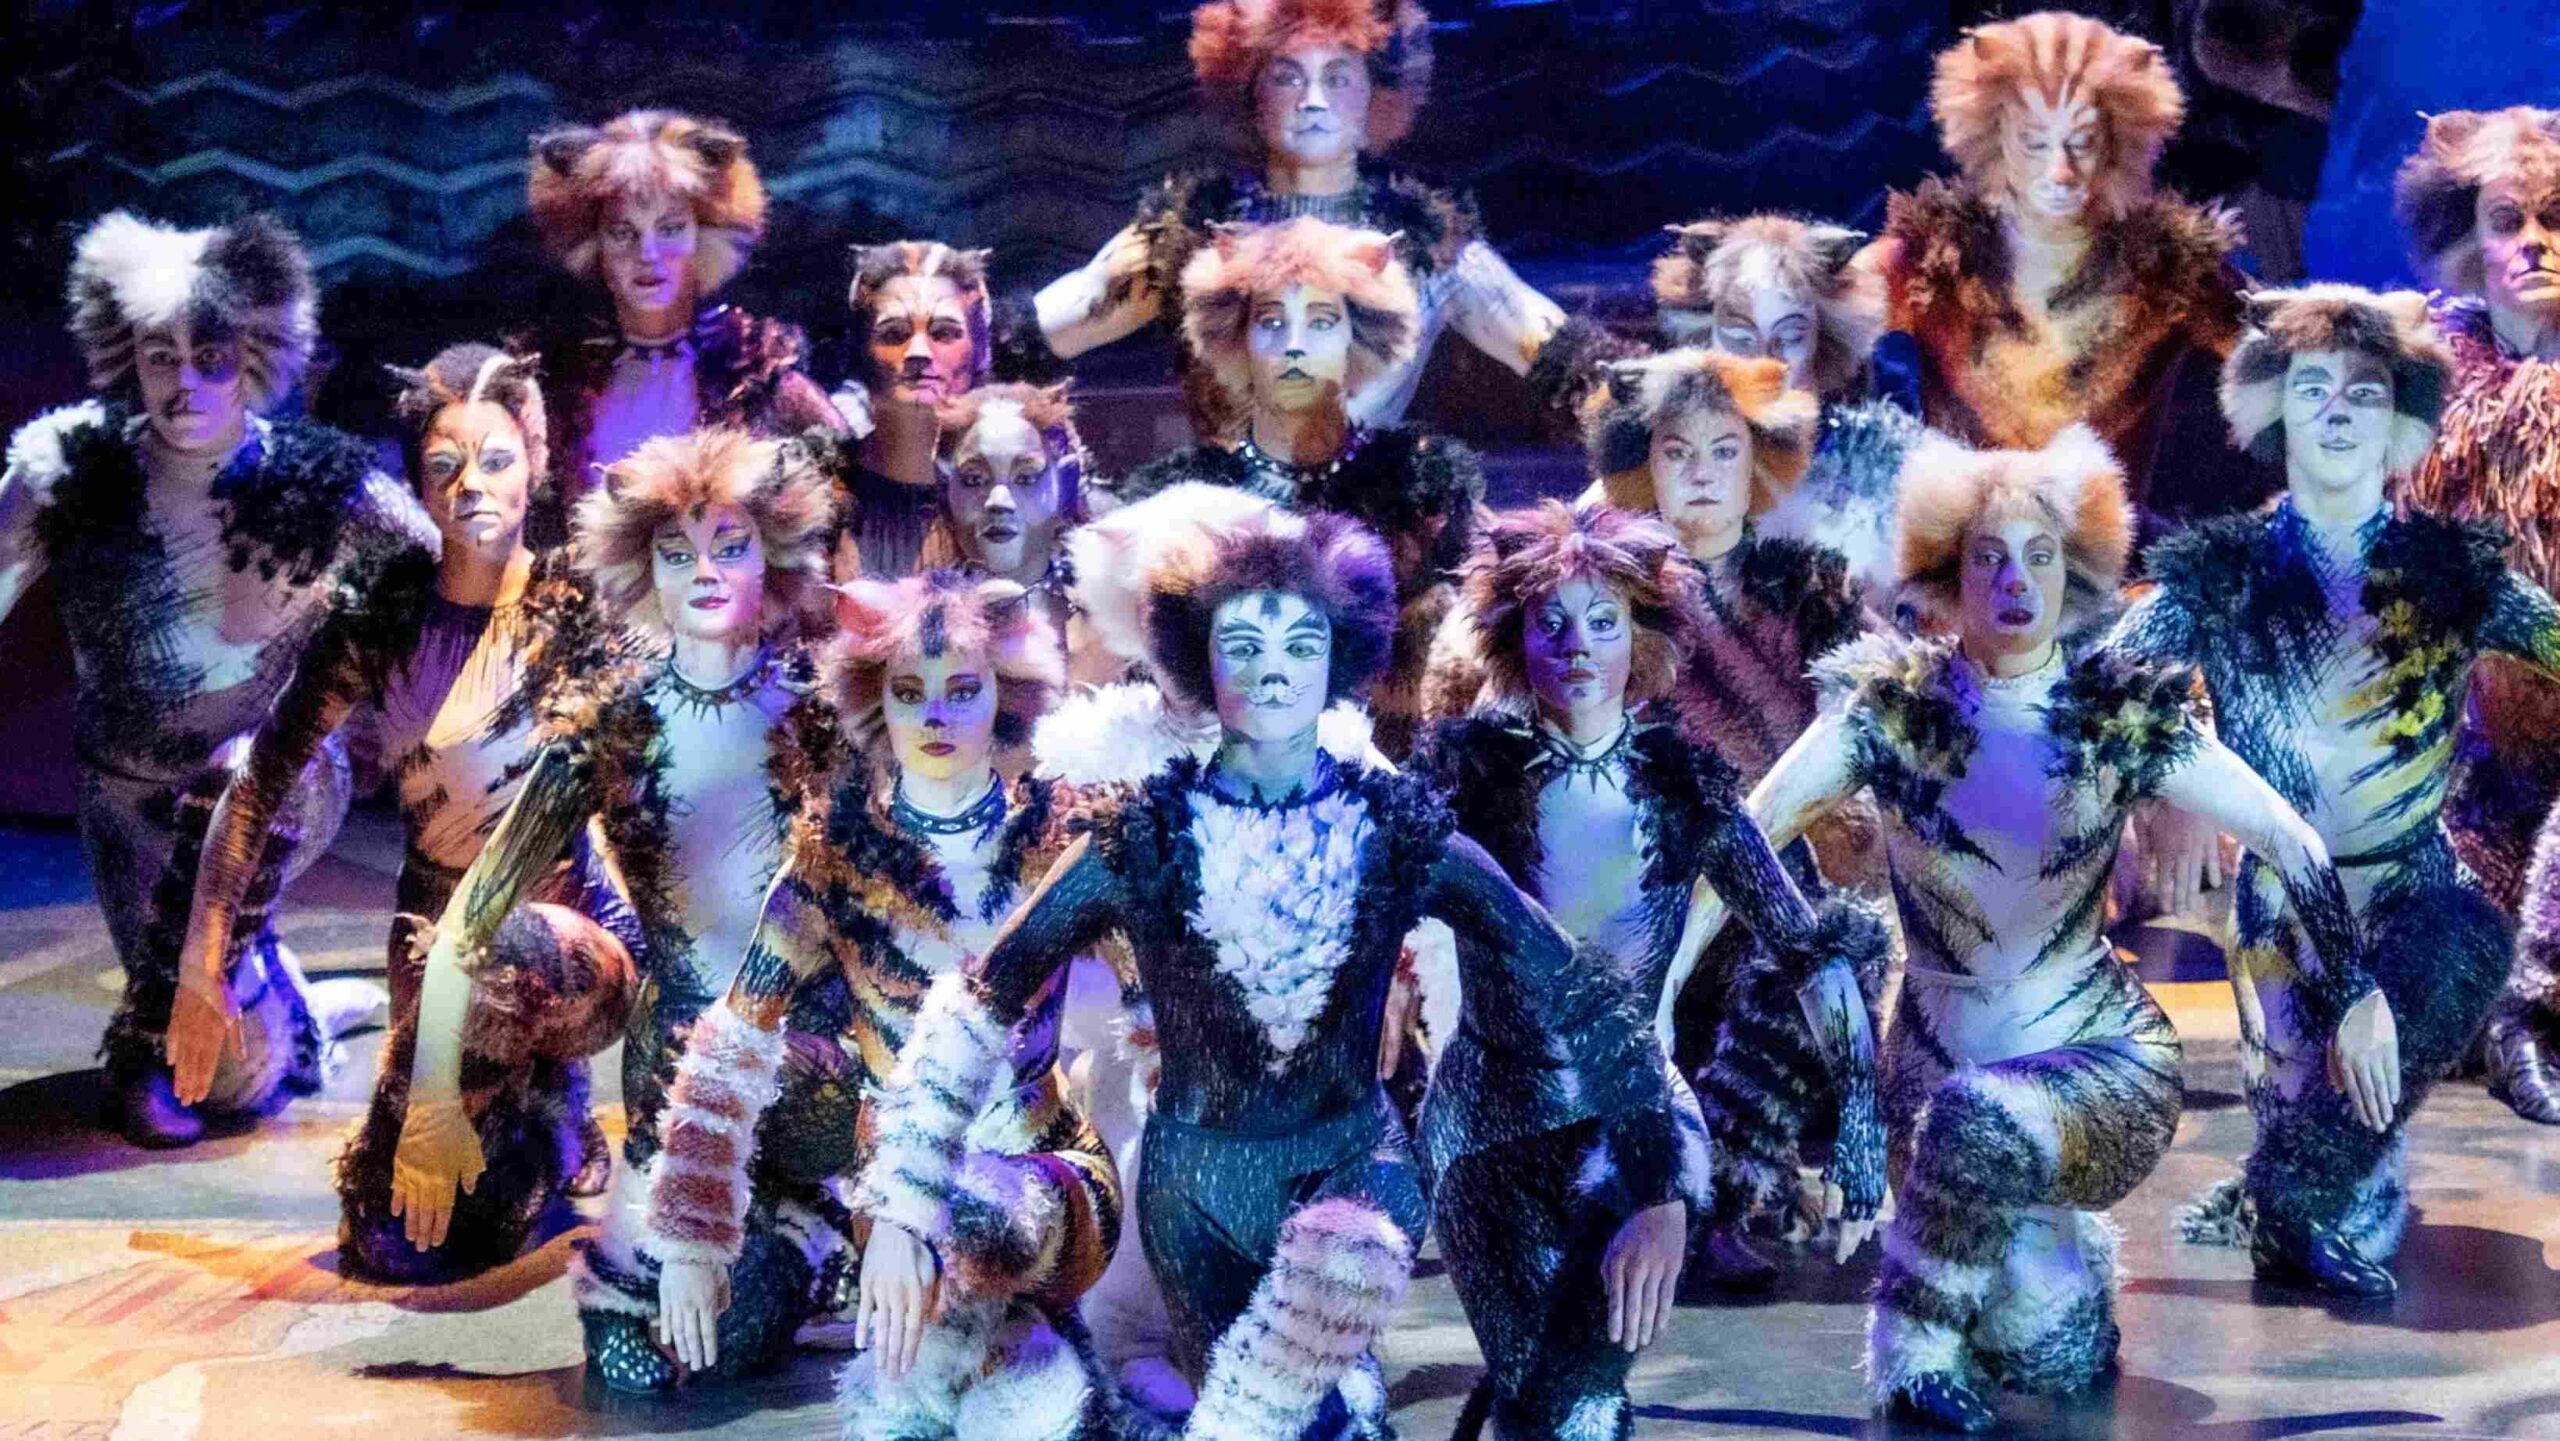 Andrew Lloyd Webber’s ‘Cats’ is streaming for free